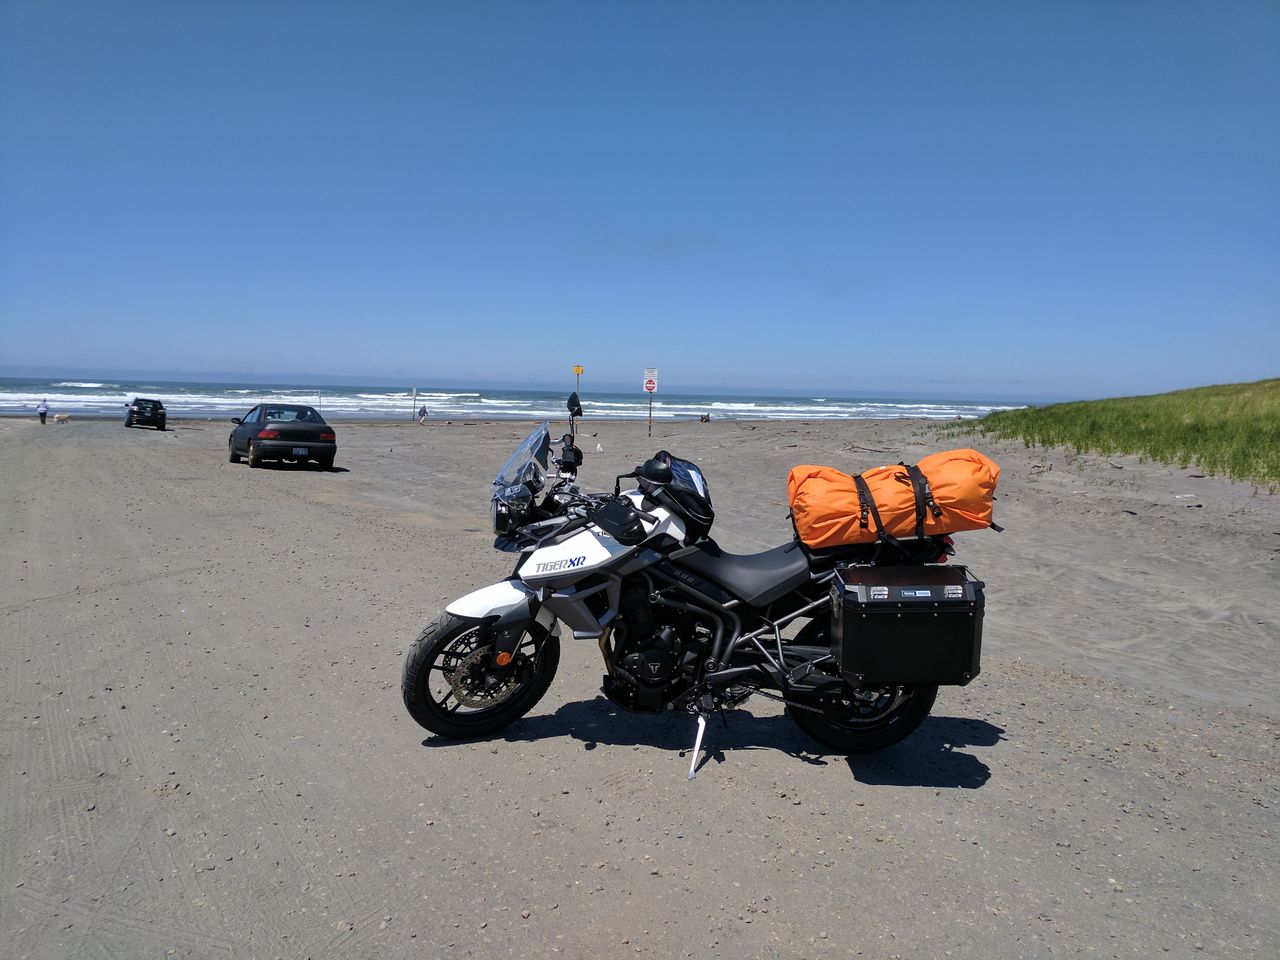 First day of ownership and we made it to the Pacific.